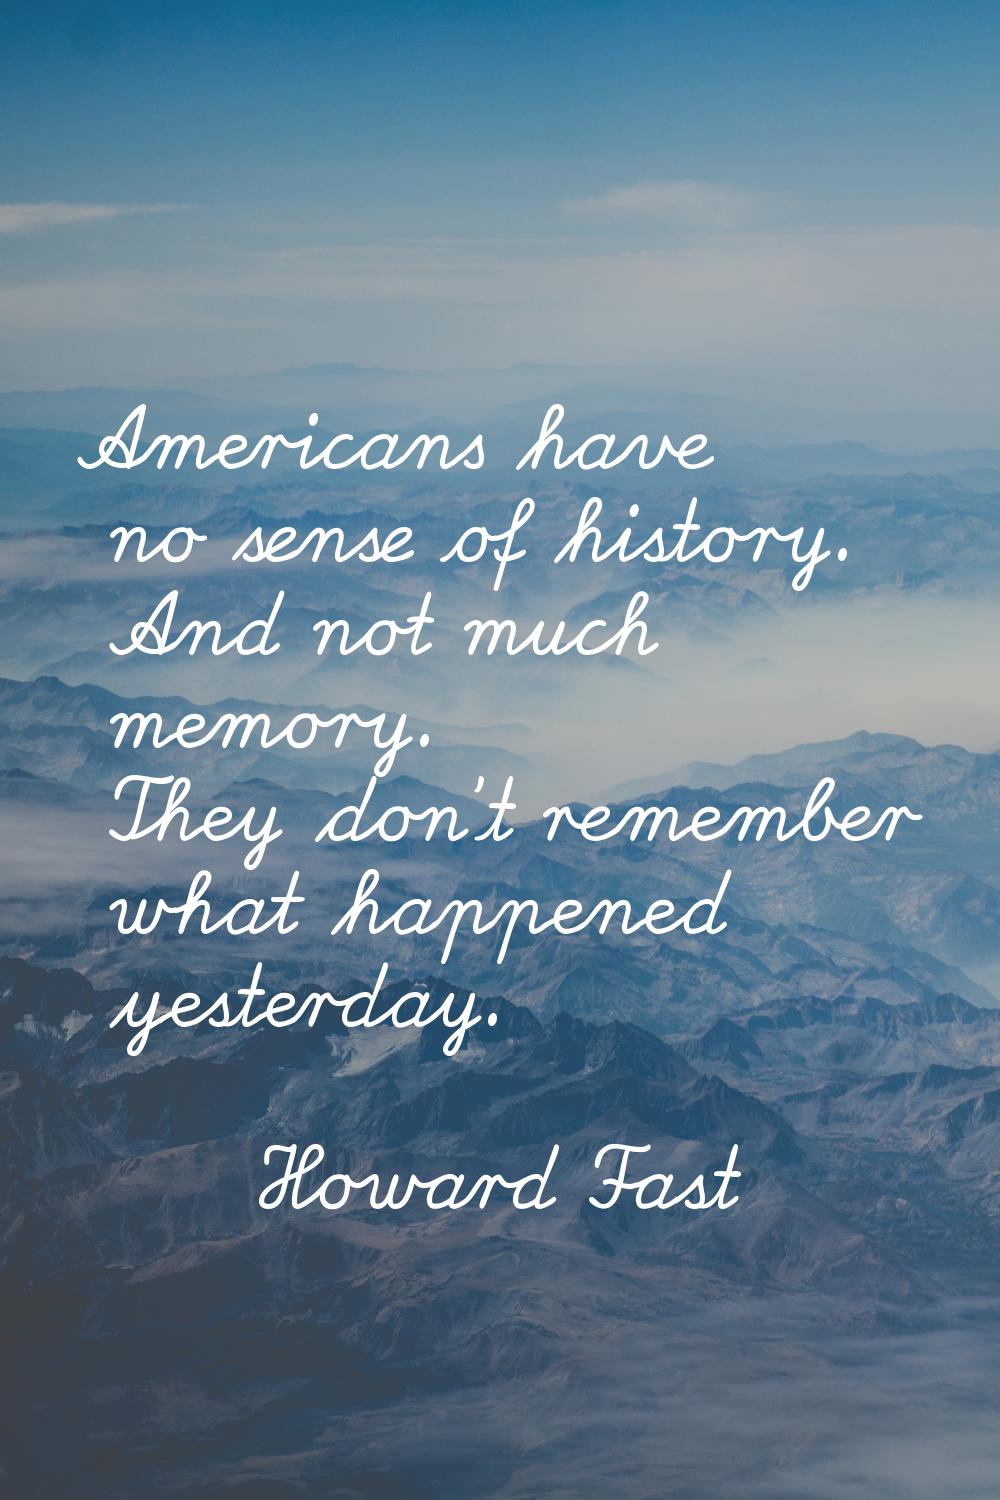 Americans have no sense of history. And not much memory. They don't remember what happened yesterda